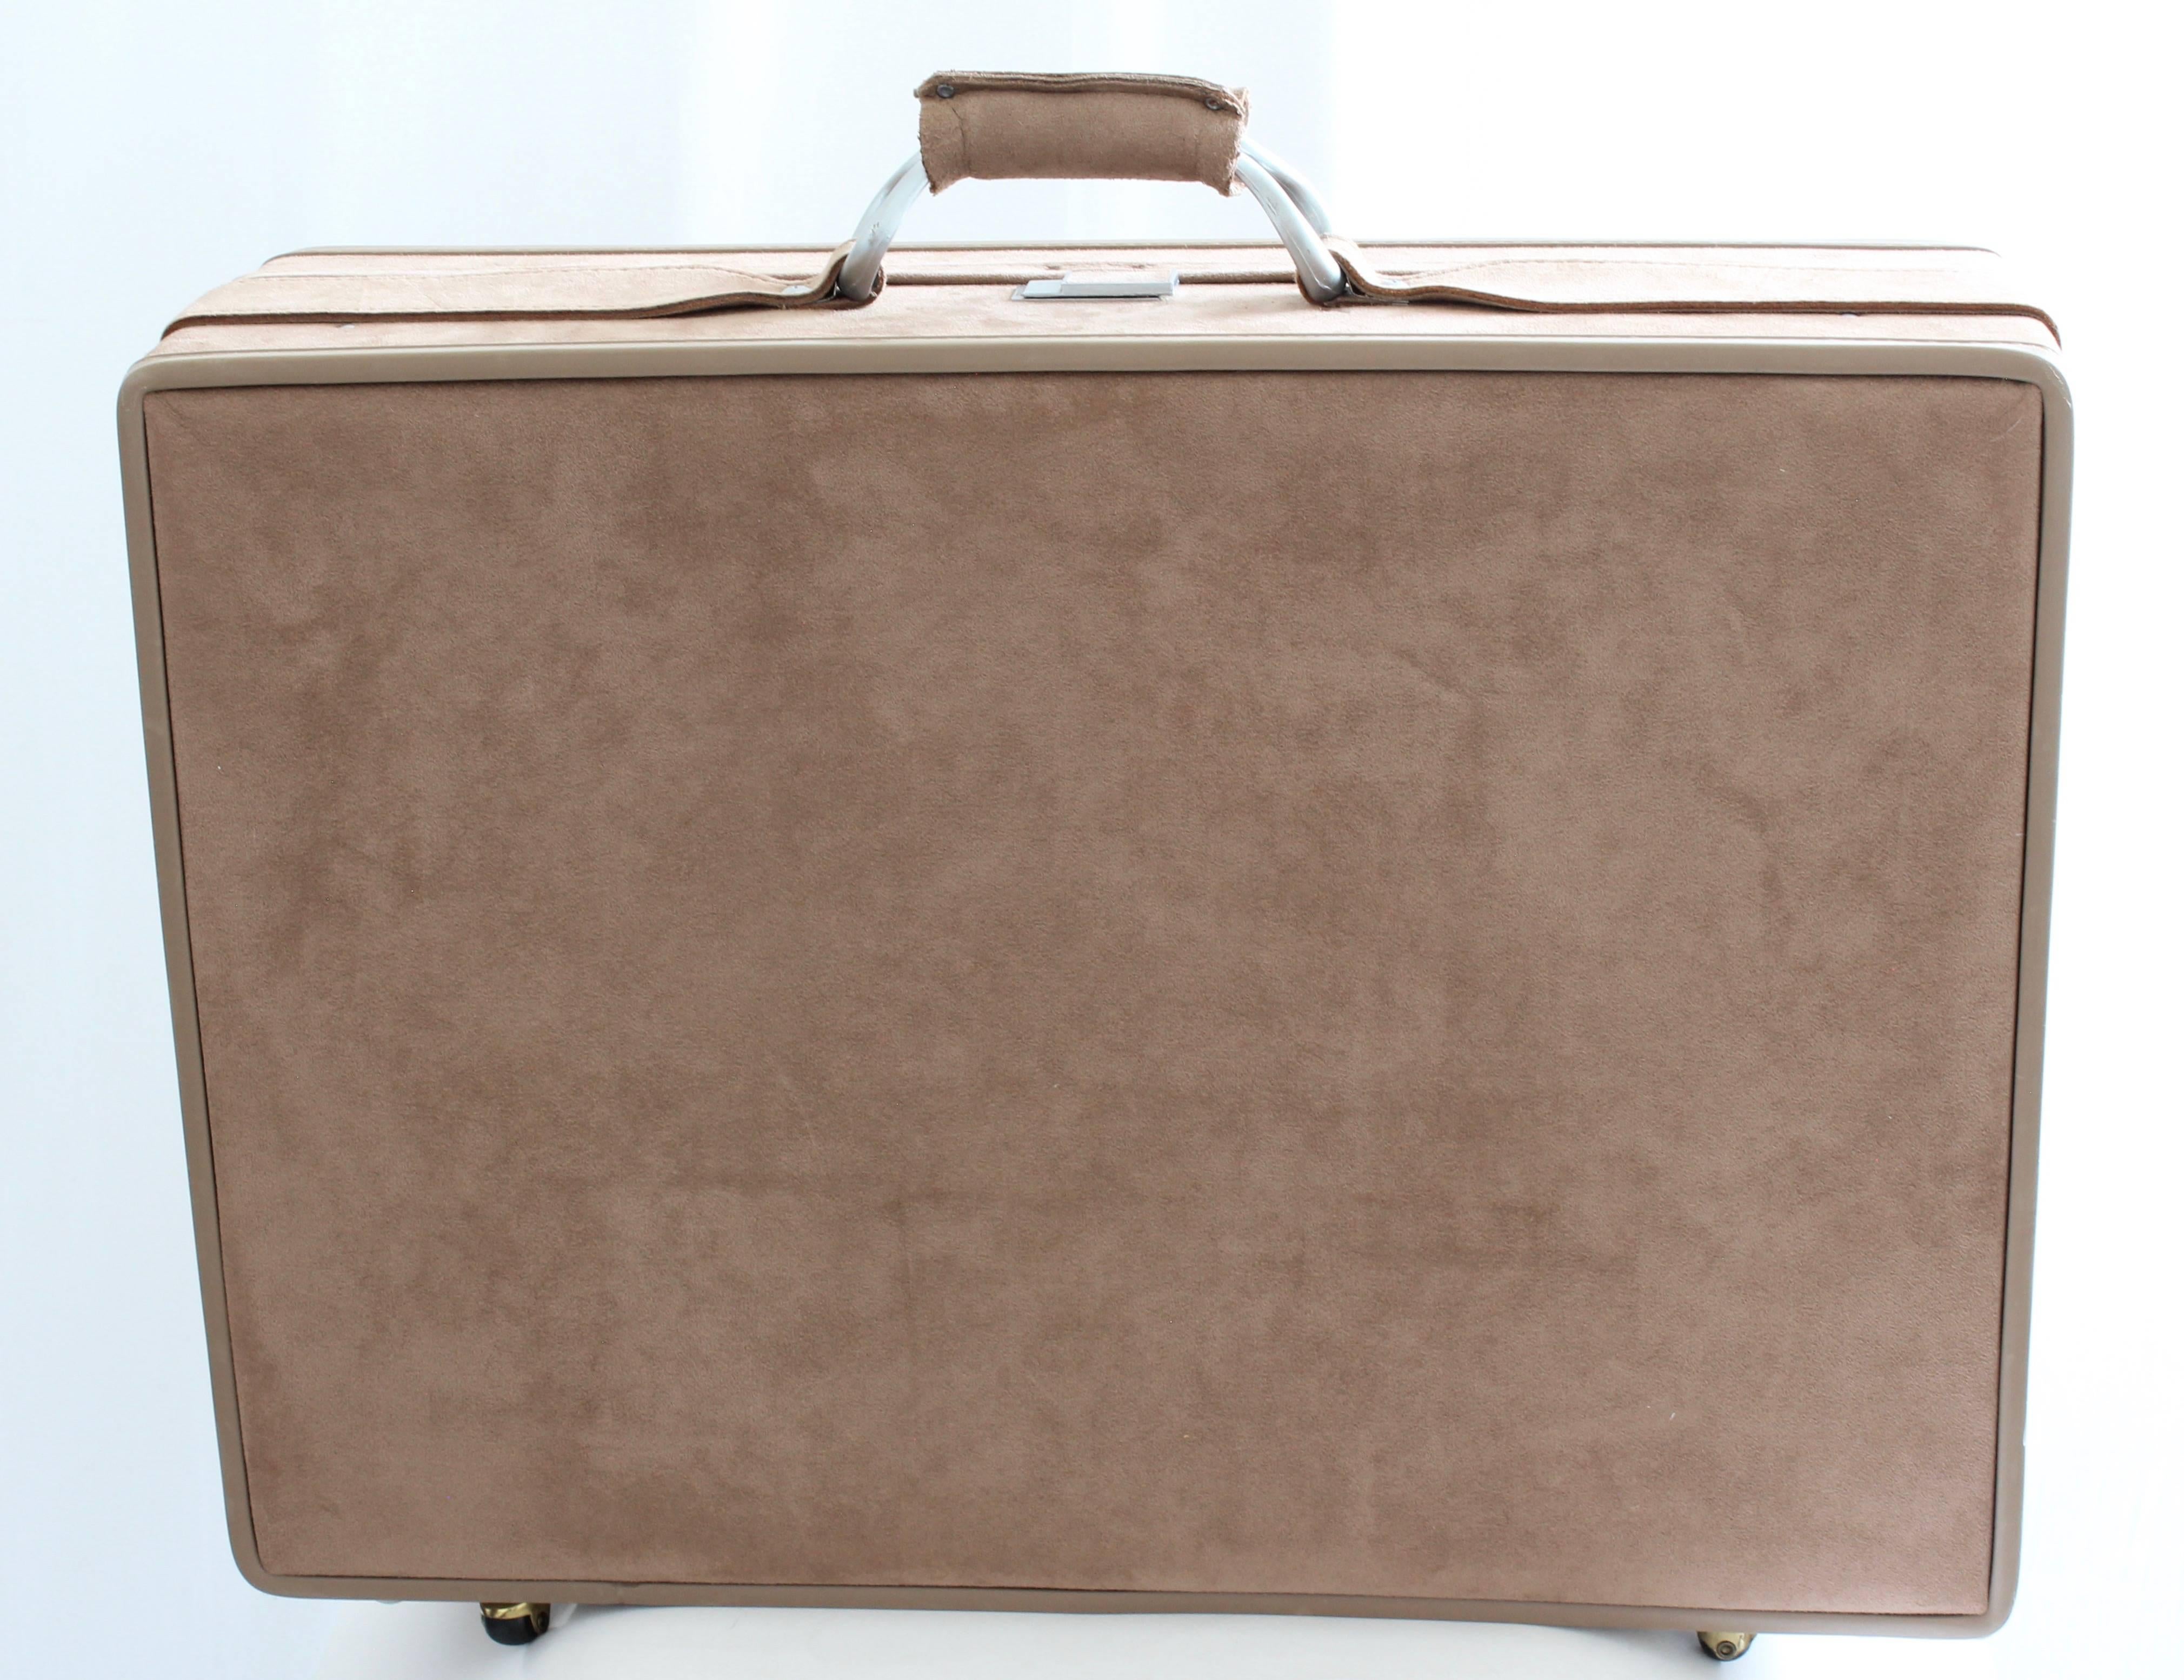 Here's a 25in belting suitcase from Hartmann, most likely made in the early 80s.  Made from taupe sueded fabric, this was part of a larger collection we recently acquired that was designed by Halston for Hartmann (see image 16, where we show all